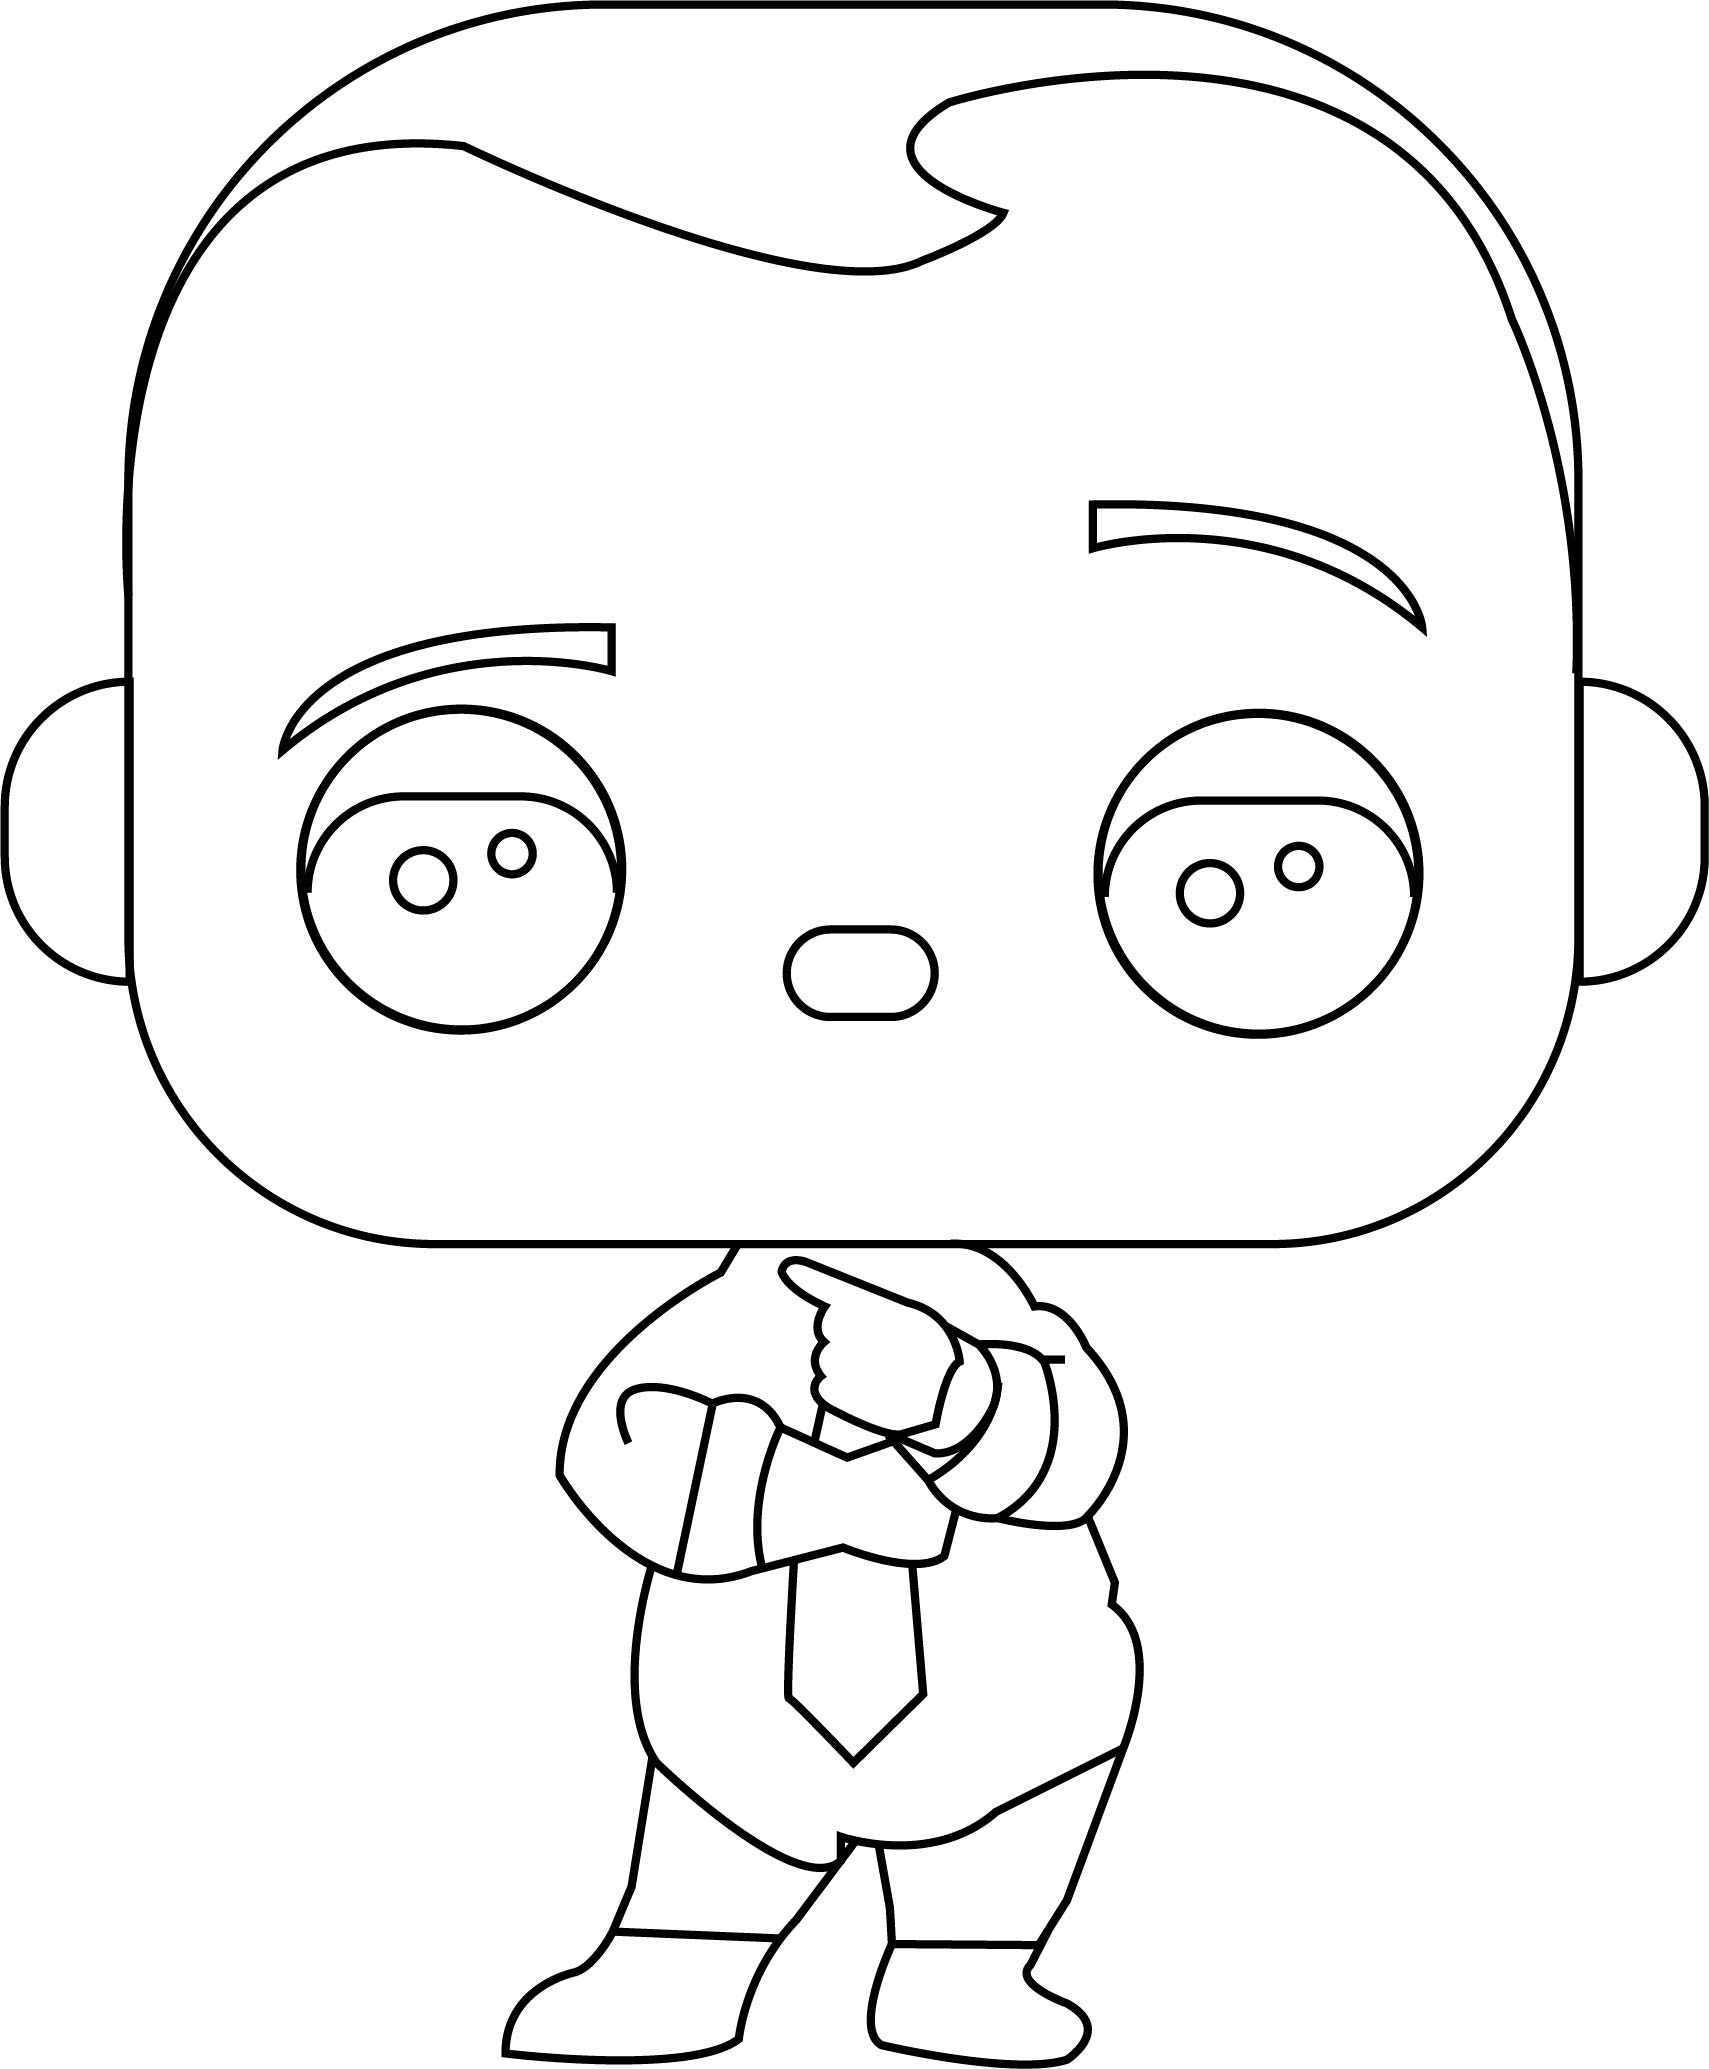 Funko Pop Boss Baby Diaper Tie Coloring Page Pages